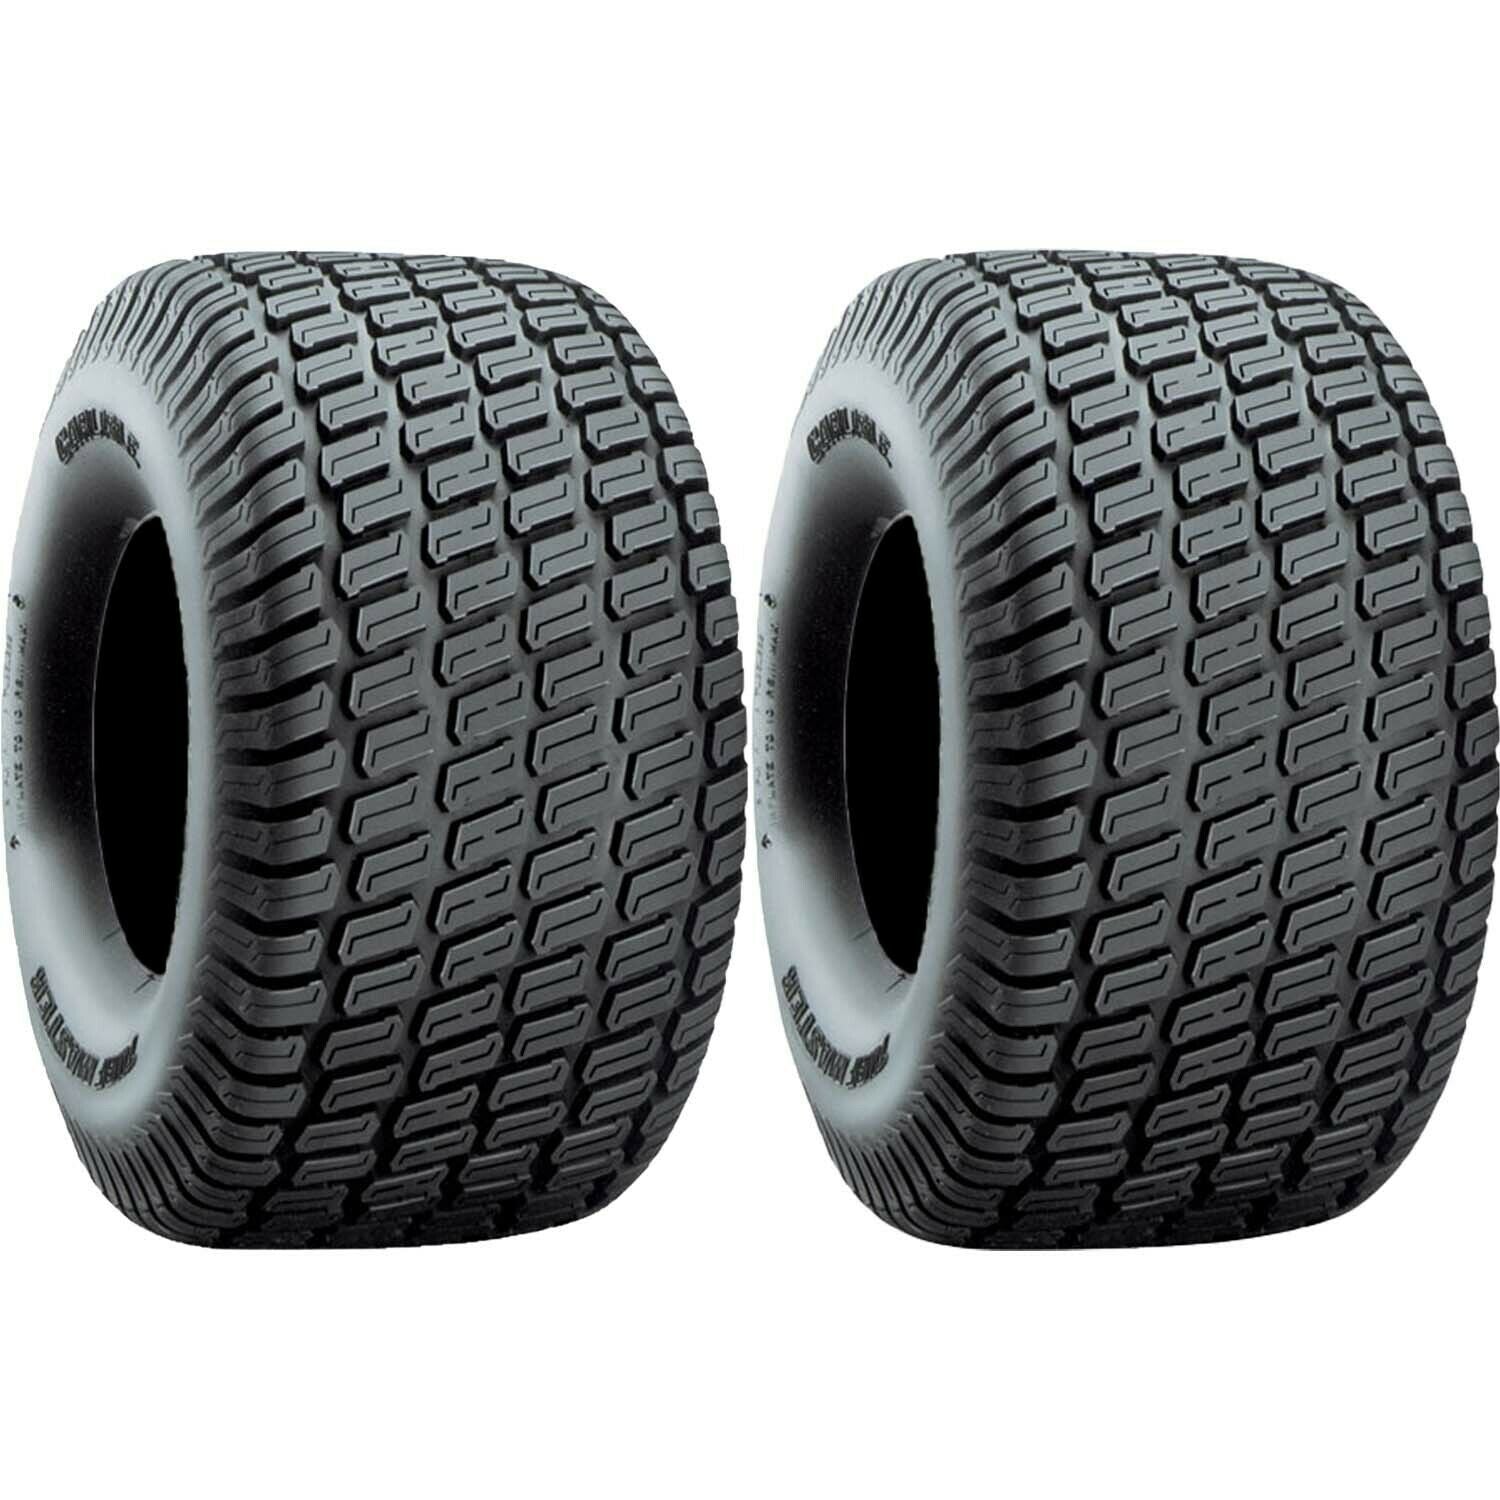 Carlisle Turf Master Lawn and Garden Tire 4Ply 18x6.50-8 - Pack of 2